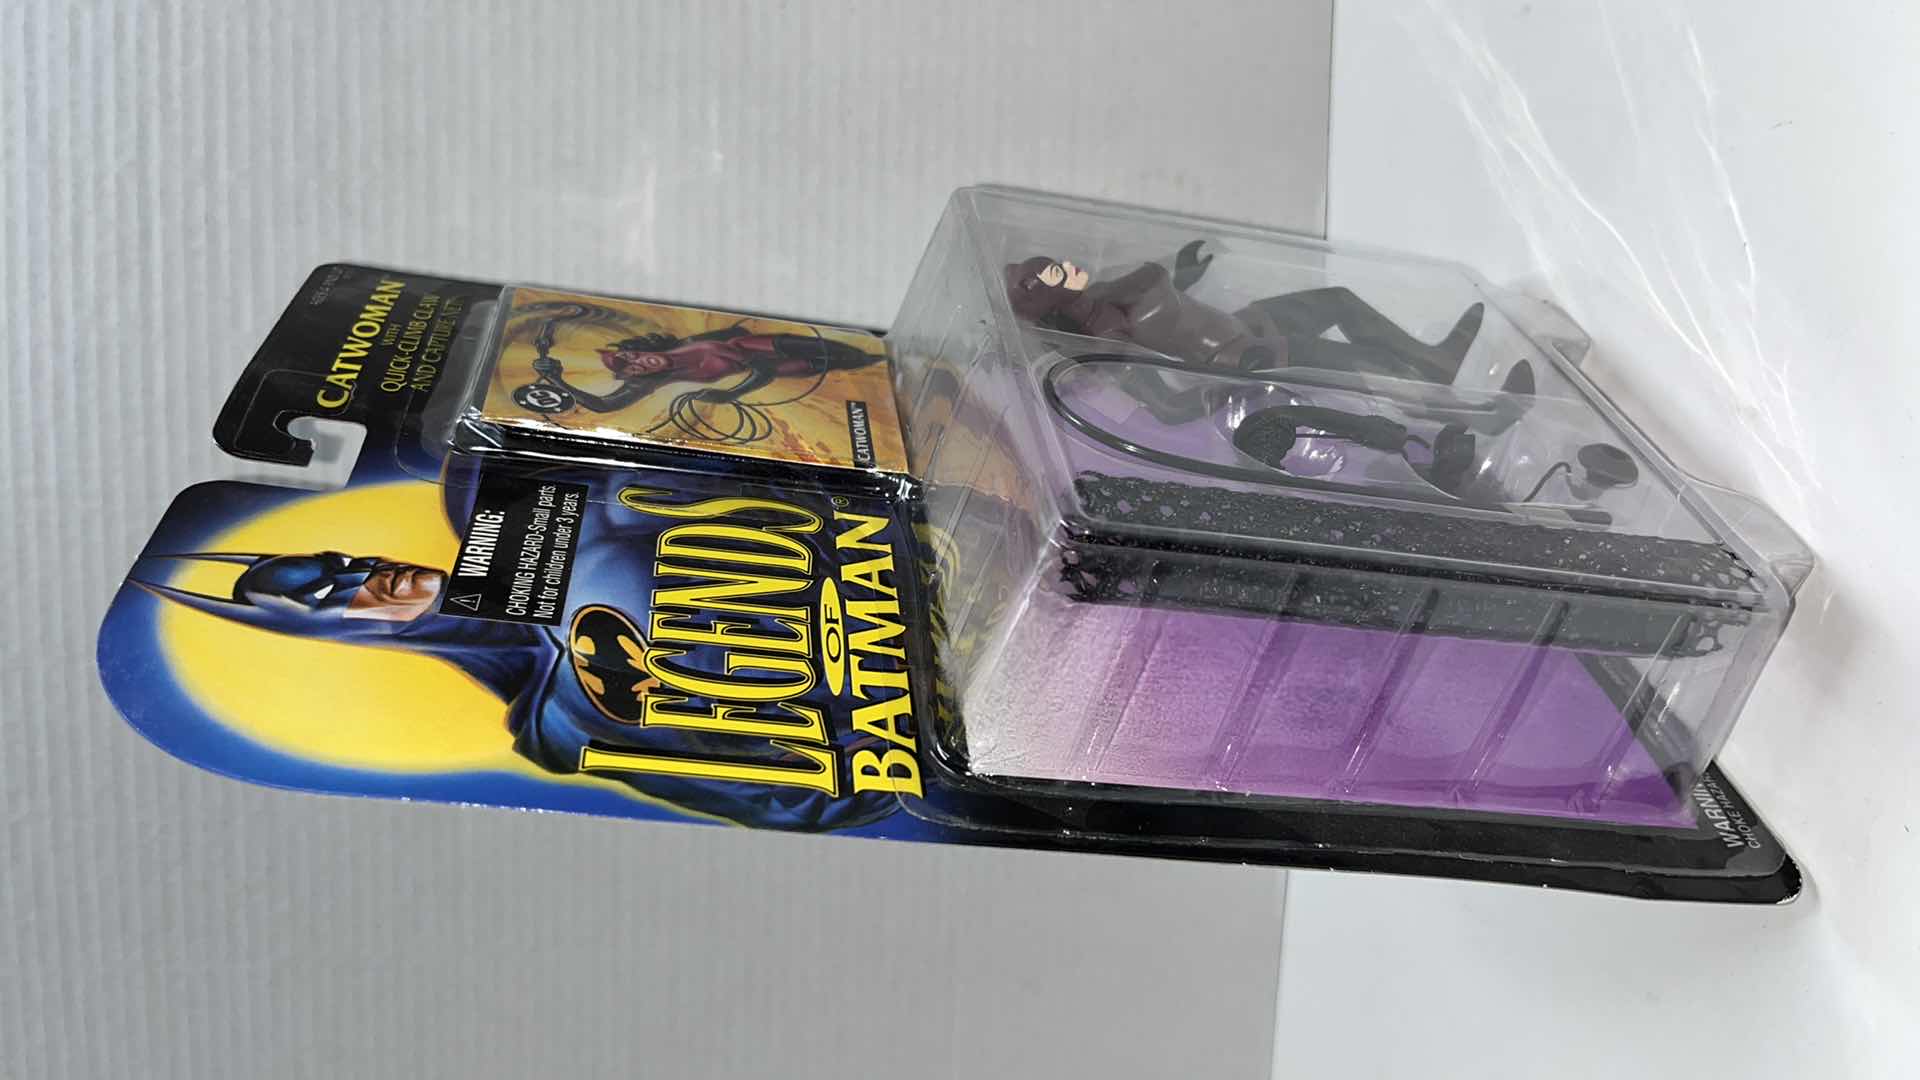 Photo 3 of NIP KENNER LEGENDS OF BATMAN ACTION FIGURE & ACCESSORIES, CATWOMAN W QUICK CLIMB CLAW/CAPTURE NET & COLLECTORS CARD (1)